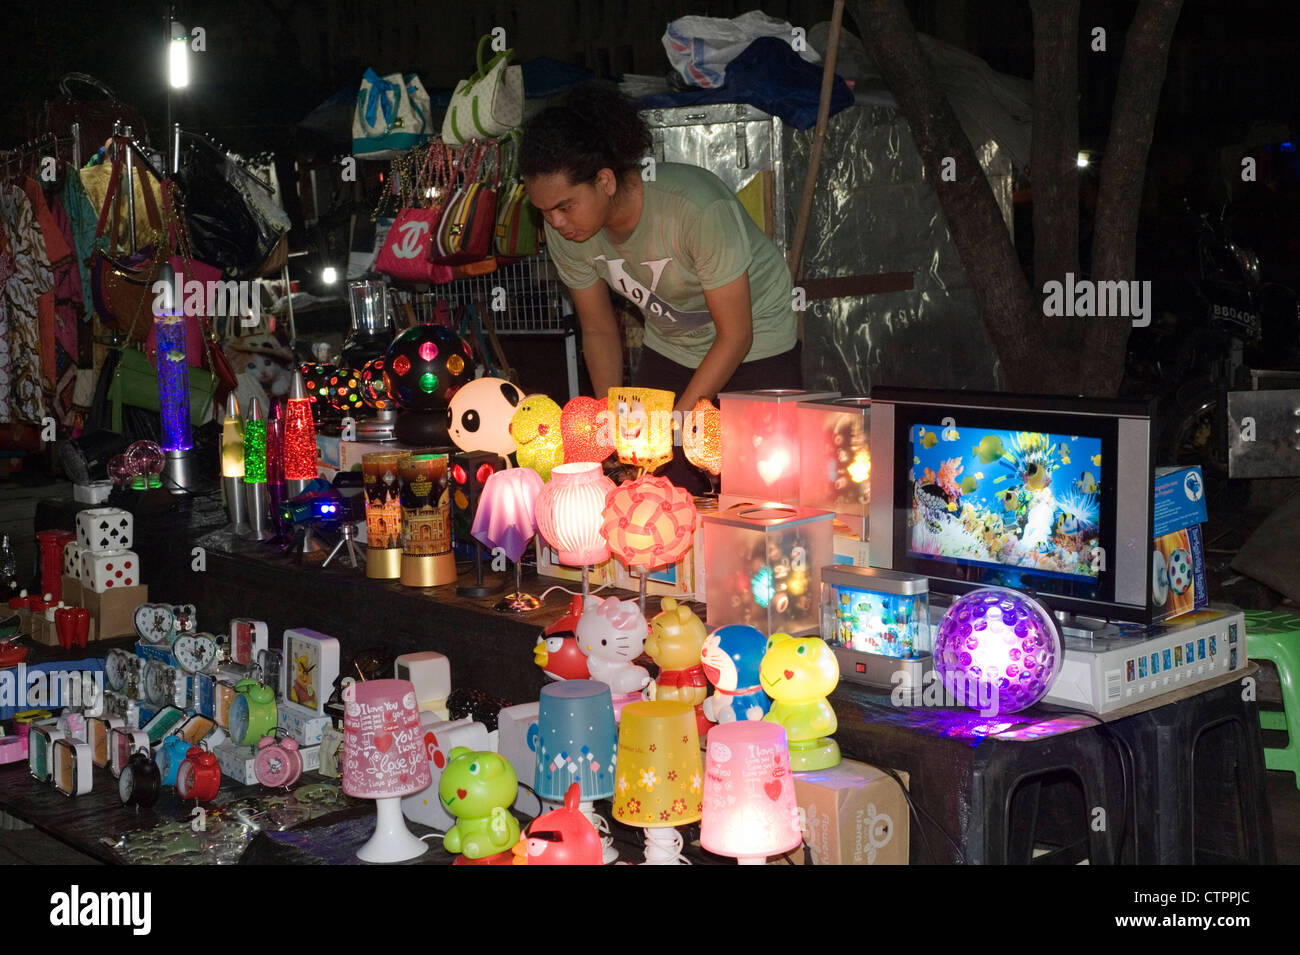 local woman selling electronic goods at the night market batavia old town jakarta java indonesia Stock Photo